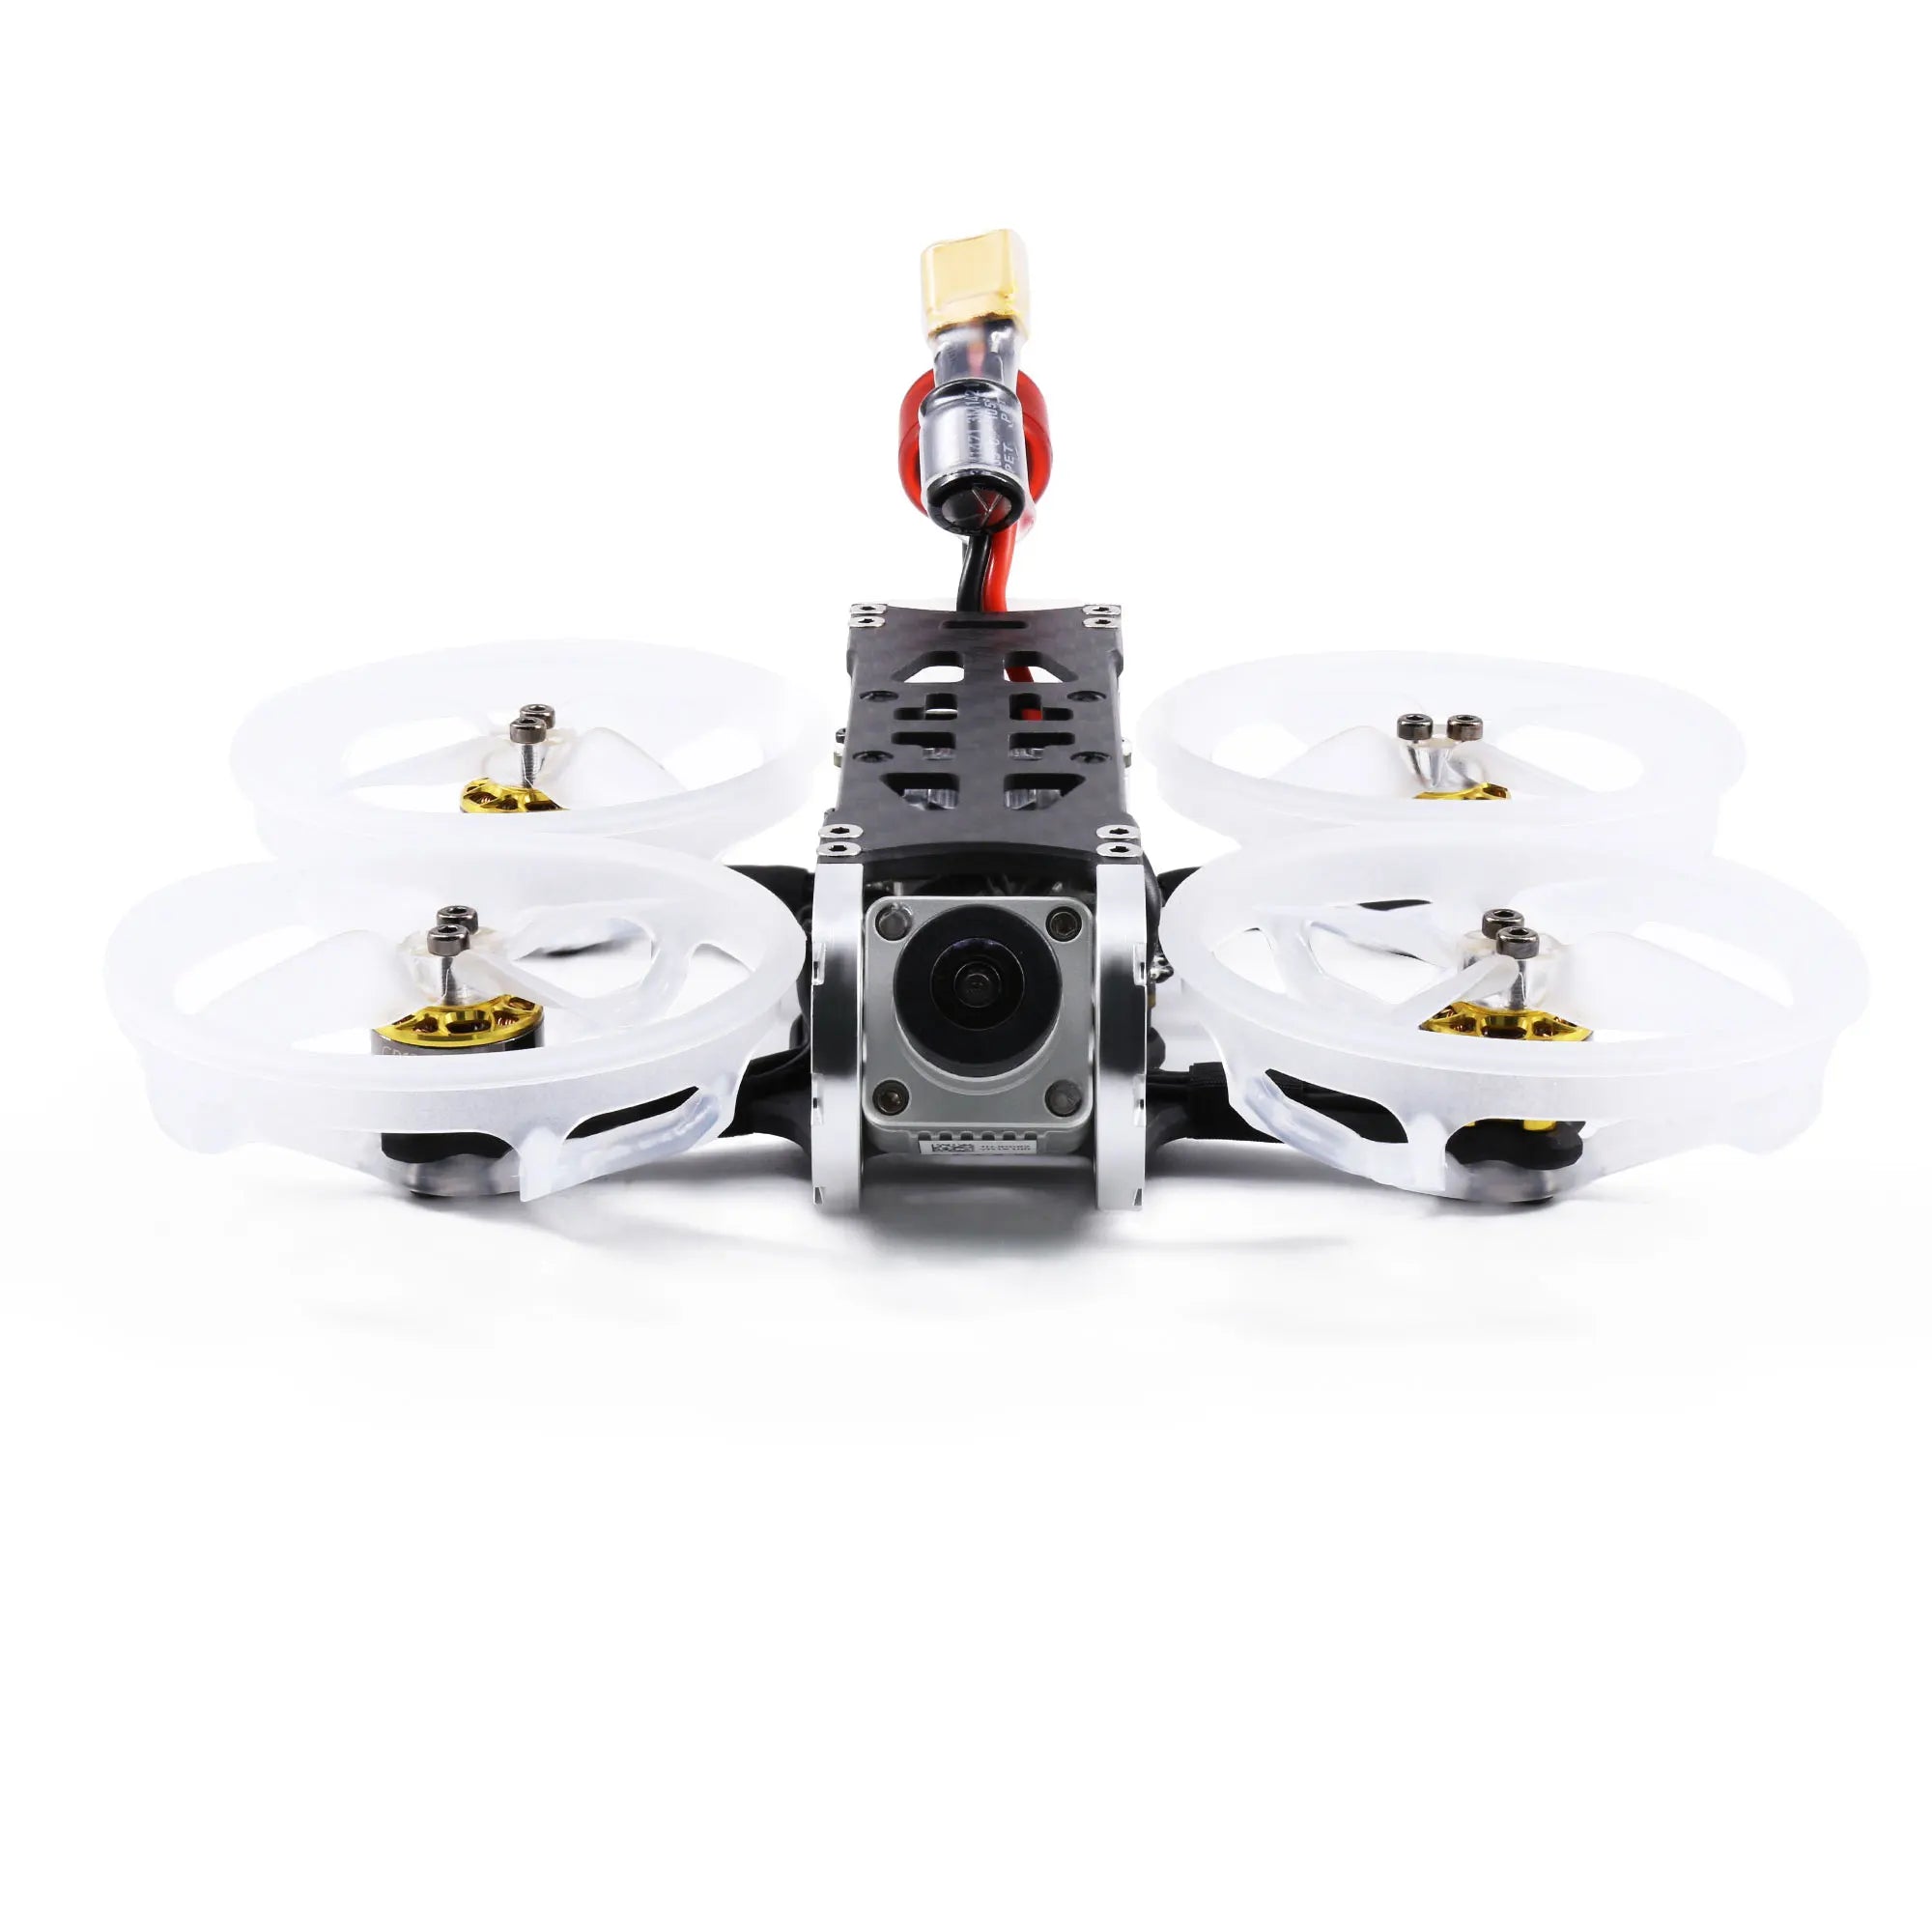 GEPRC ROCKET FPV Drone, there are two versions of ROCKET to choose from .